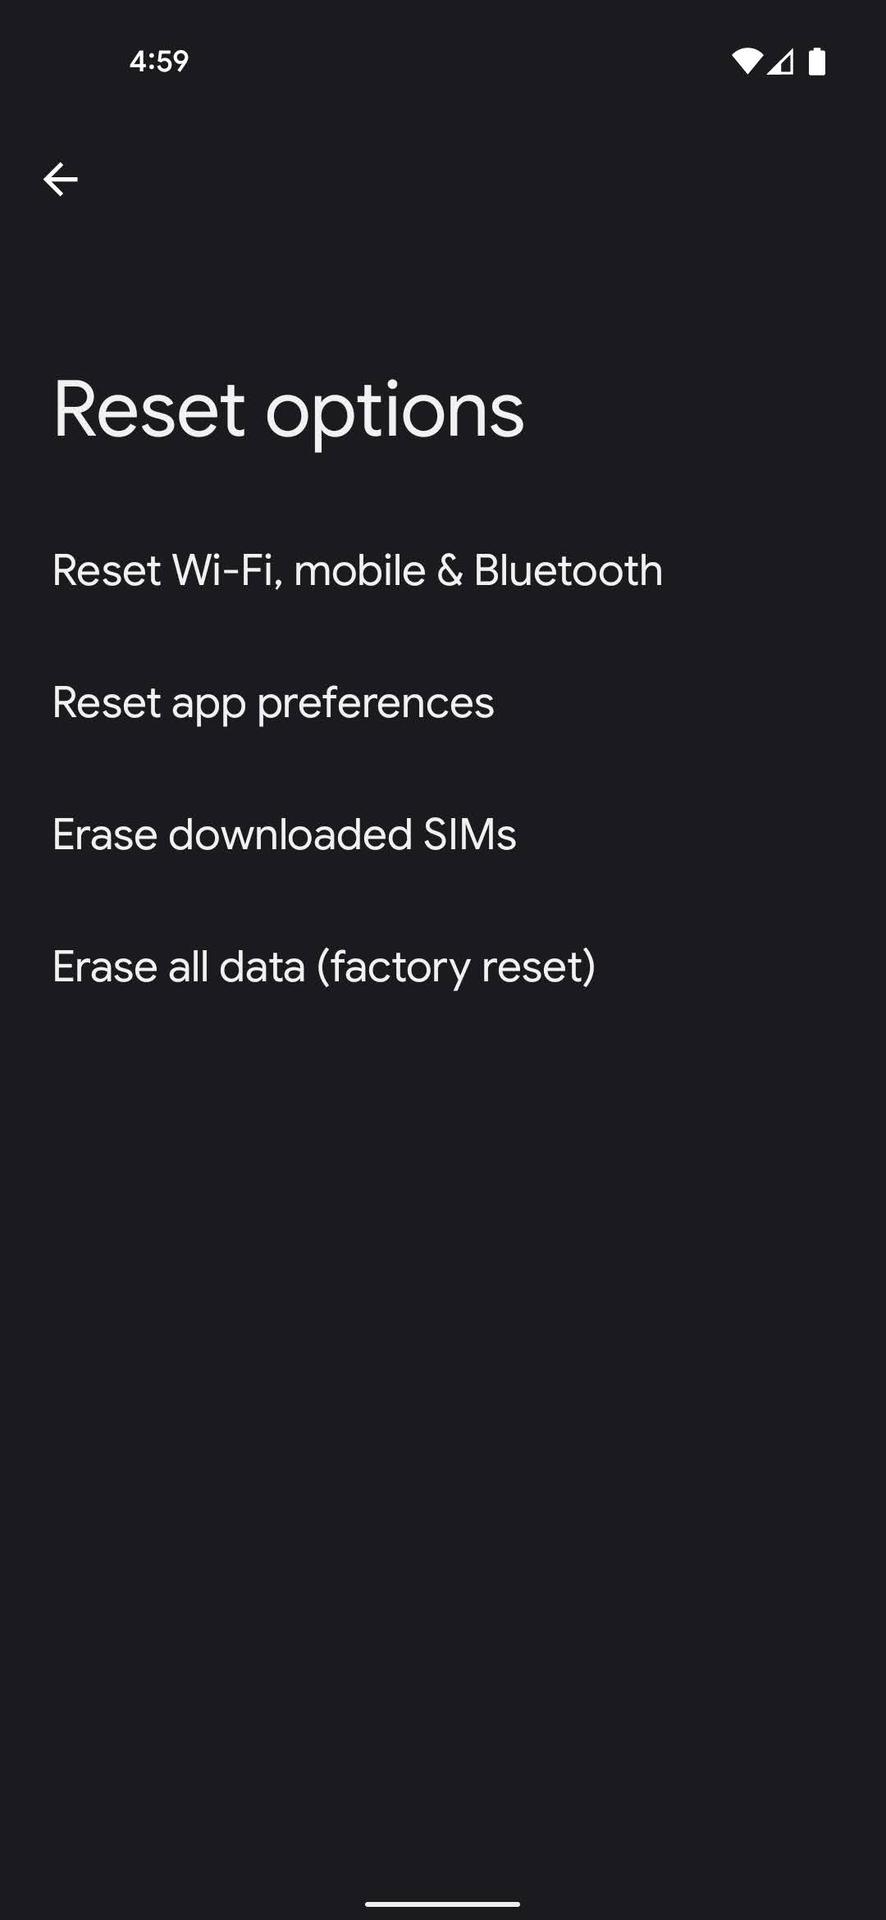 How to factory reset Android phone 3 - What to do when messaging app not working